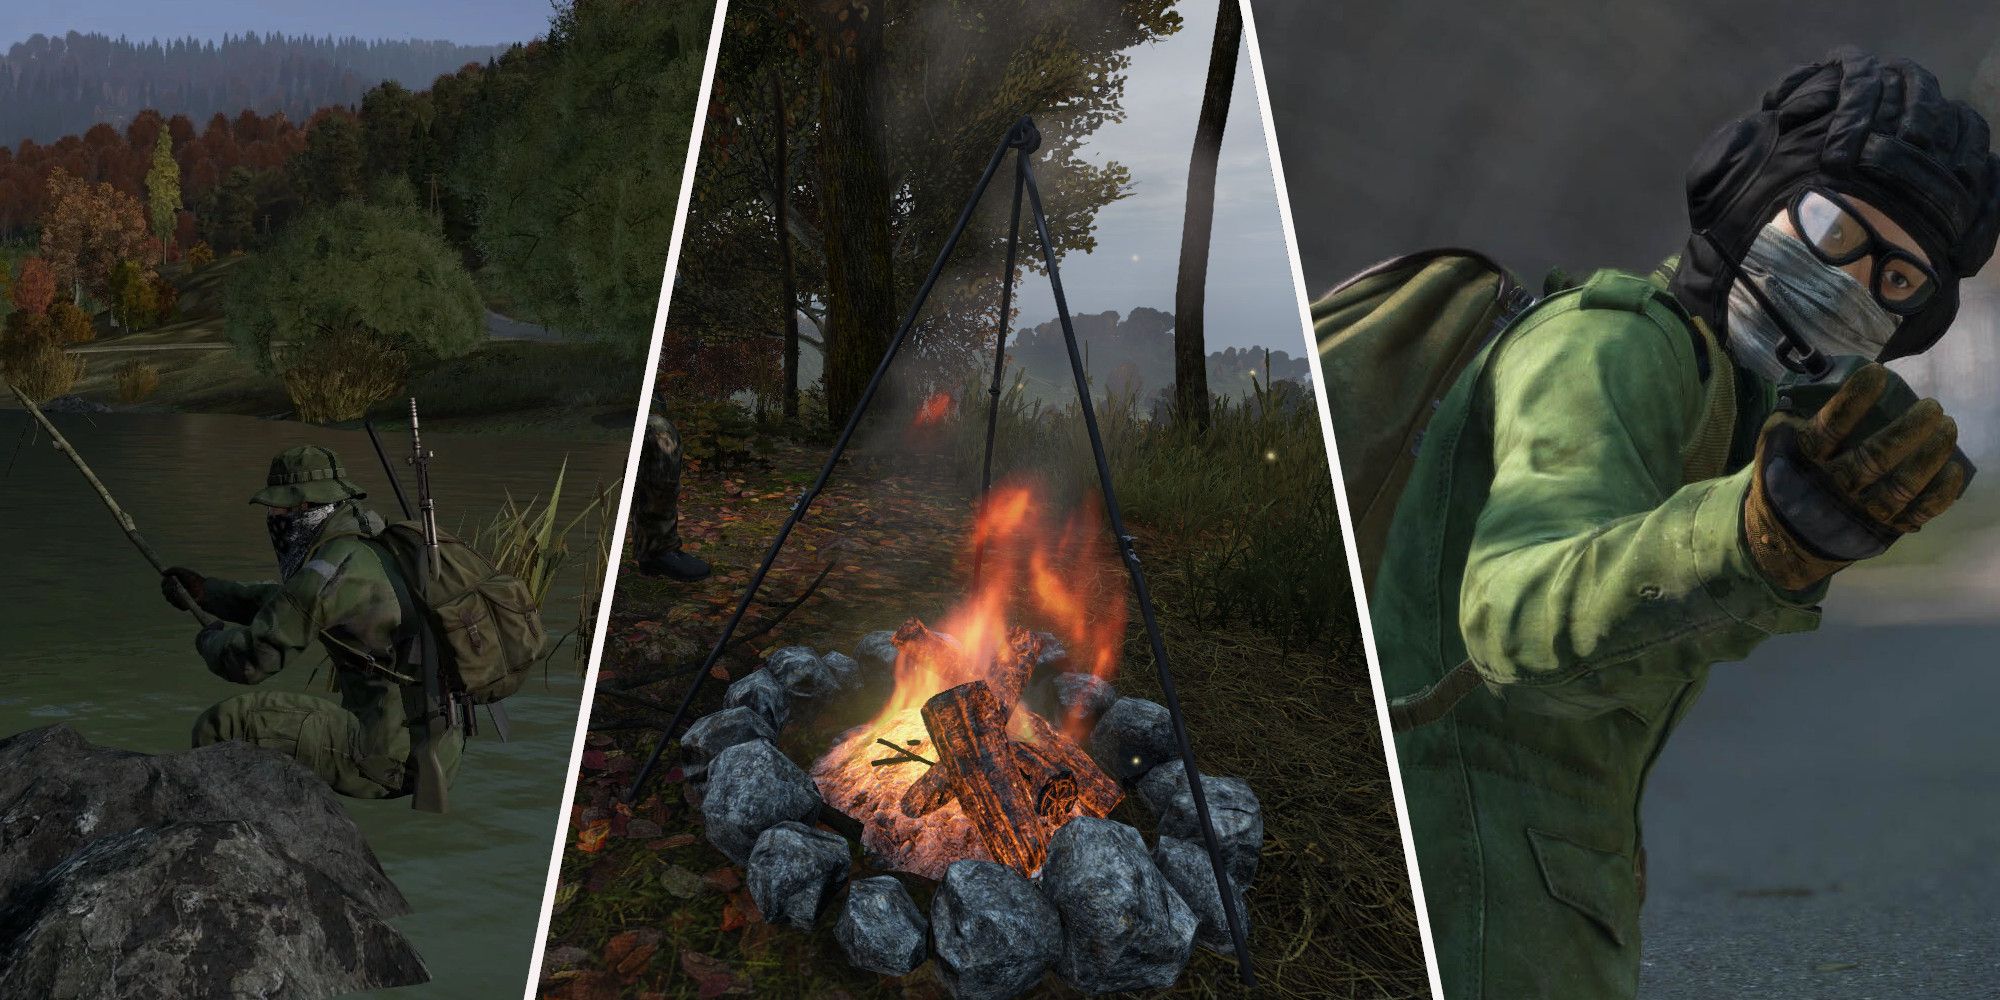 Split image: from left to right,  person fishing on top of rock, campfire with rocks and 3 sticks above it, and character in green shirt, helmet and backback with walkie talkie